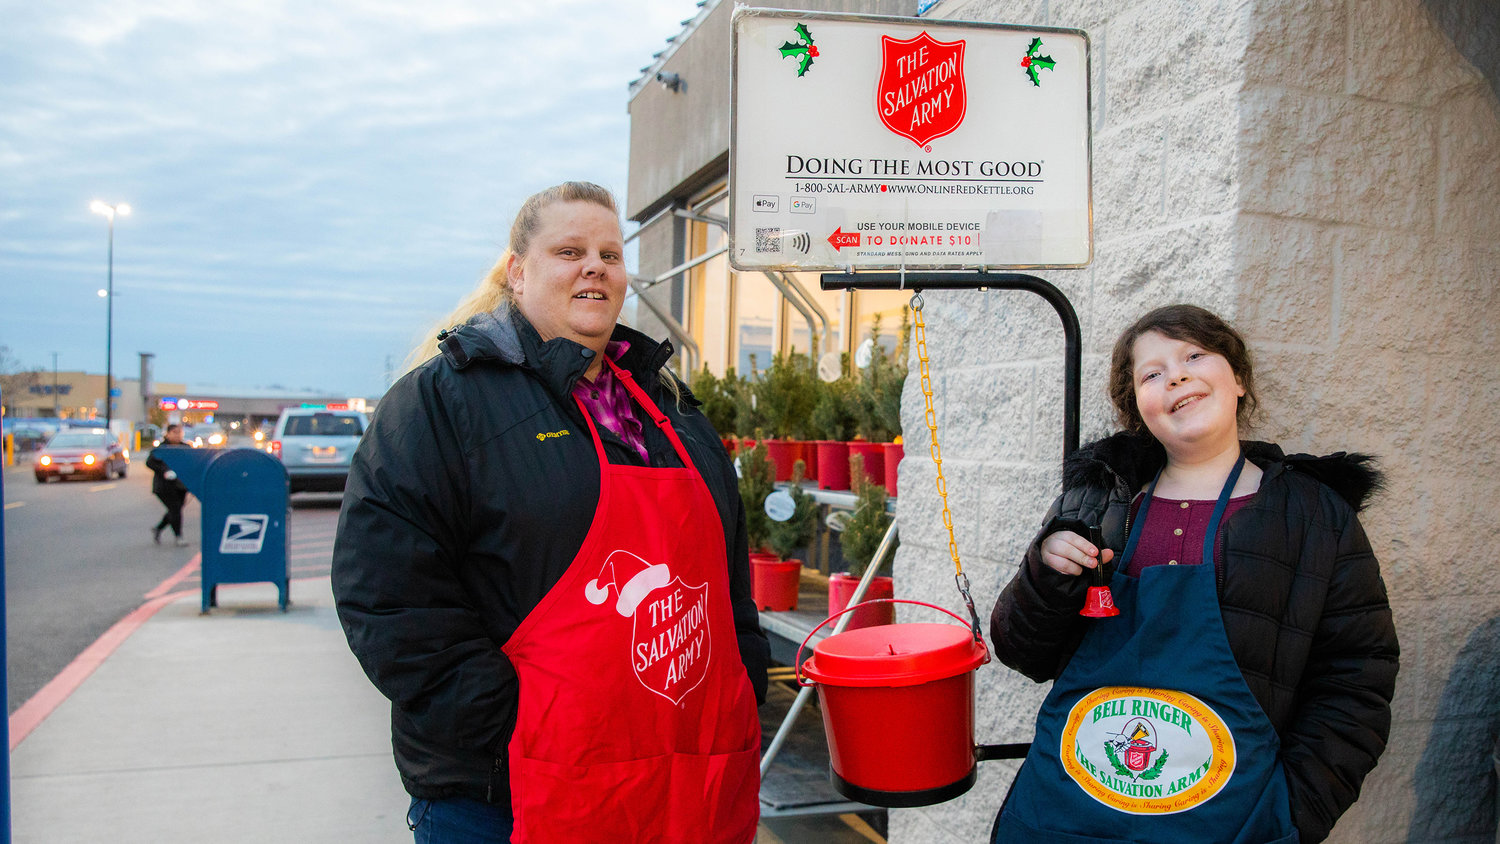 Tacy Pendleton and Elizabeth Pack, 13, pose for a photo while bellringing for The Salvation Army outside Walmart in Chehalis on Monday.